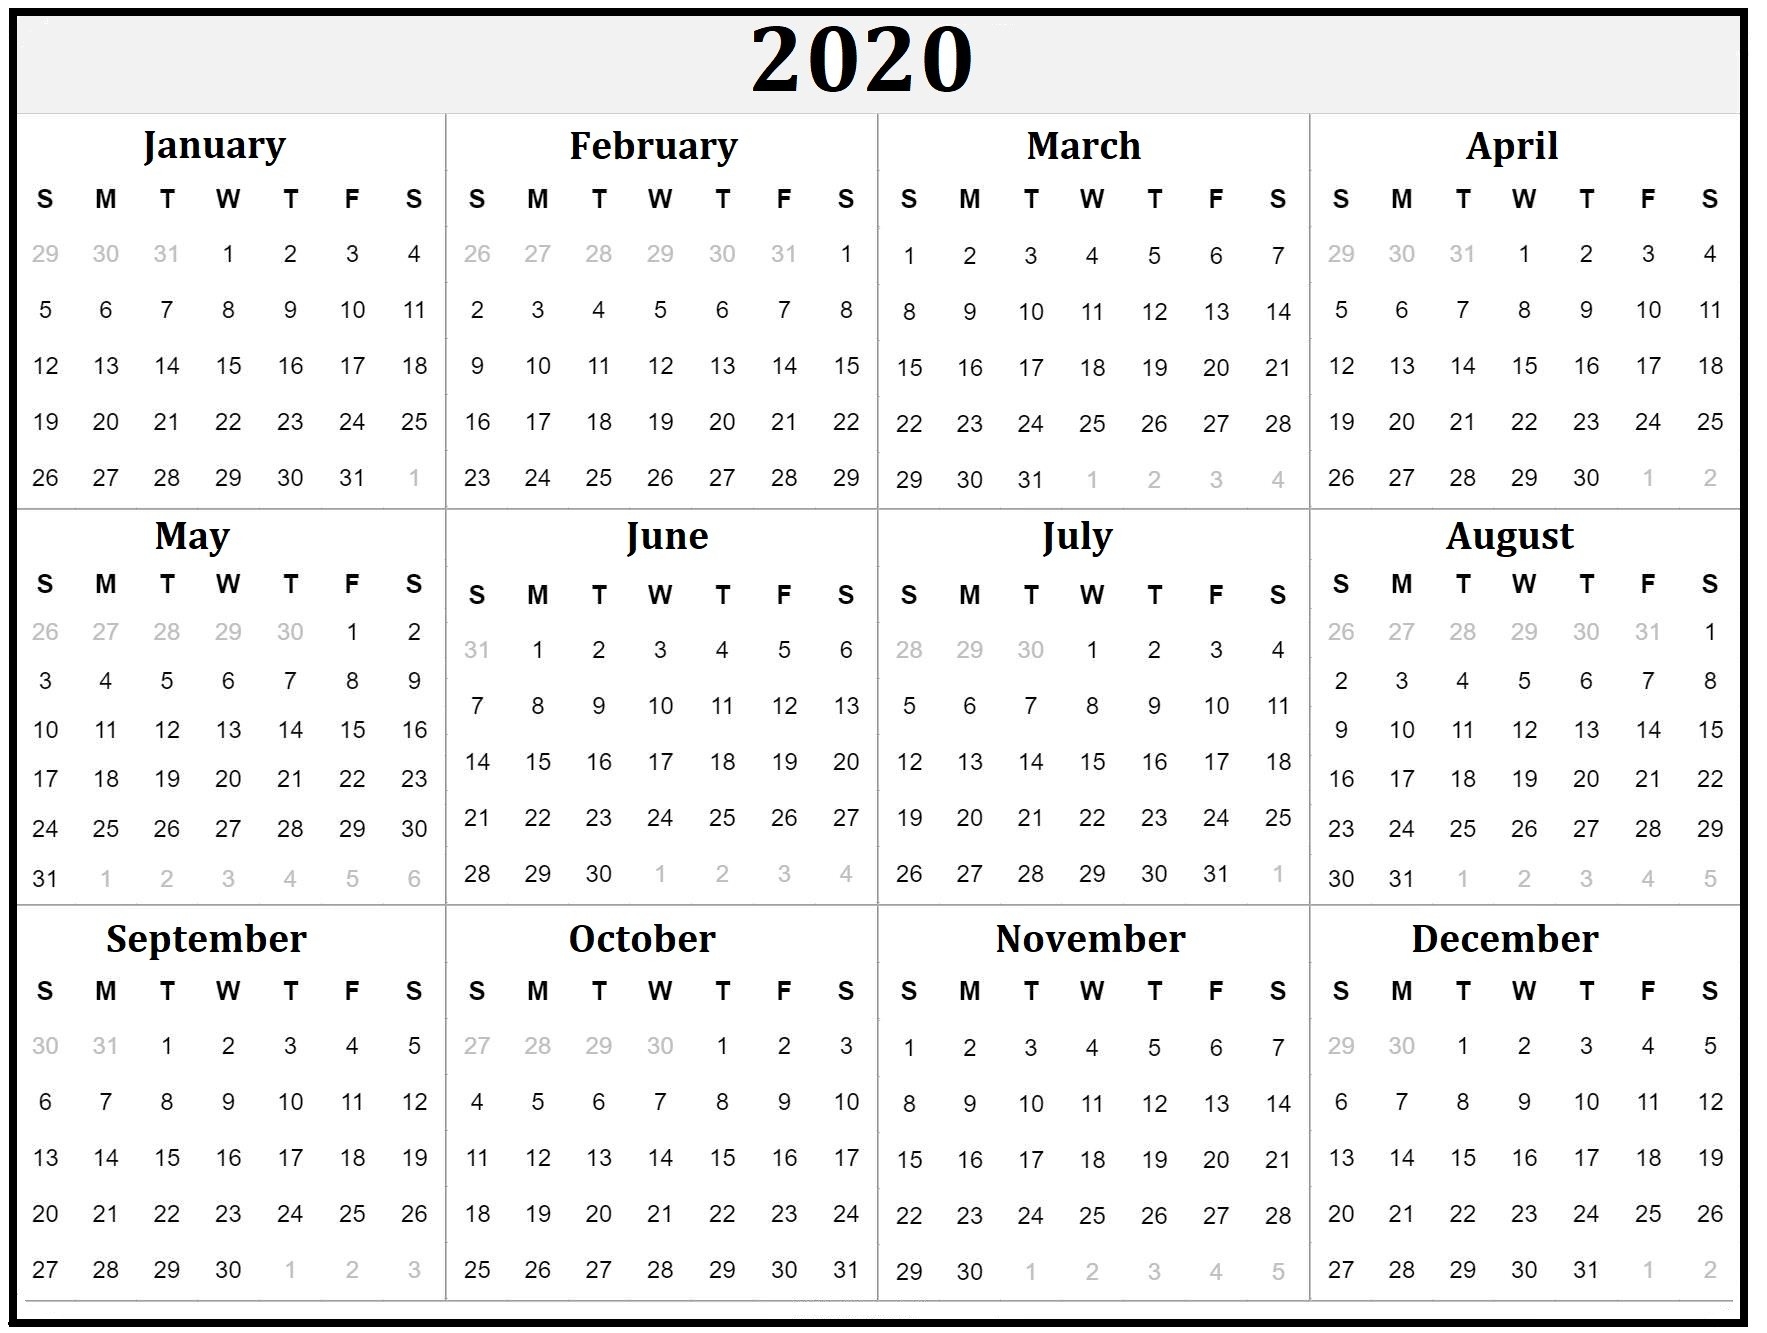 2020 Yearly Calendar Download Sunday Through Saturday | Calendar Template Printable Monthly Yearly-Sunday Through Saturday Calendar